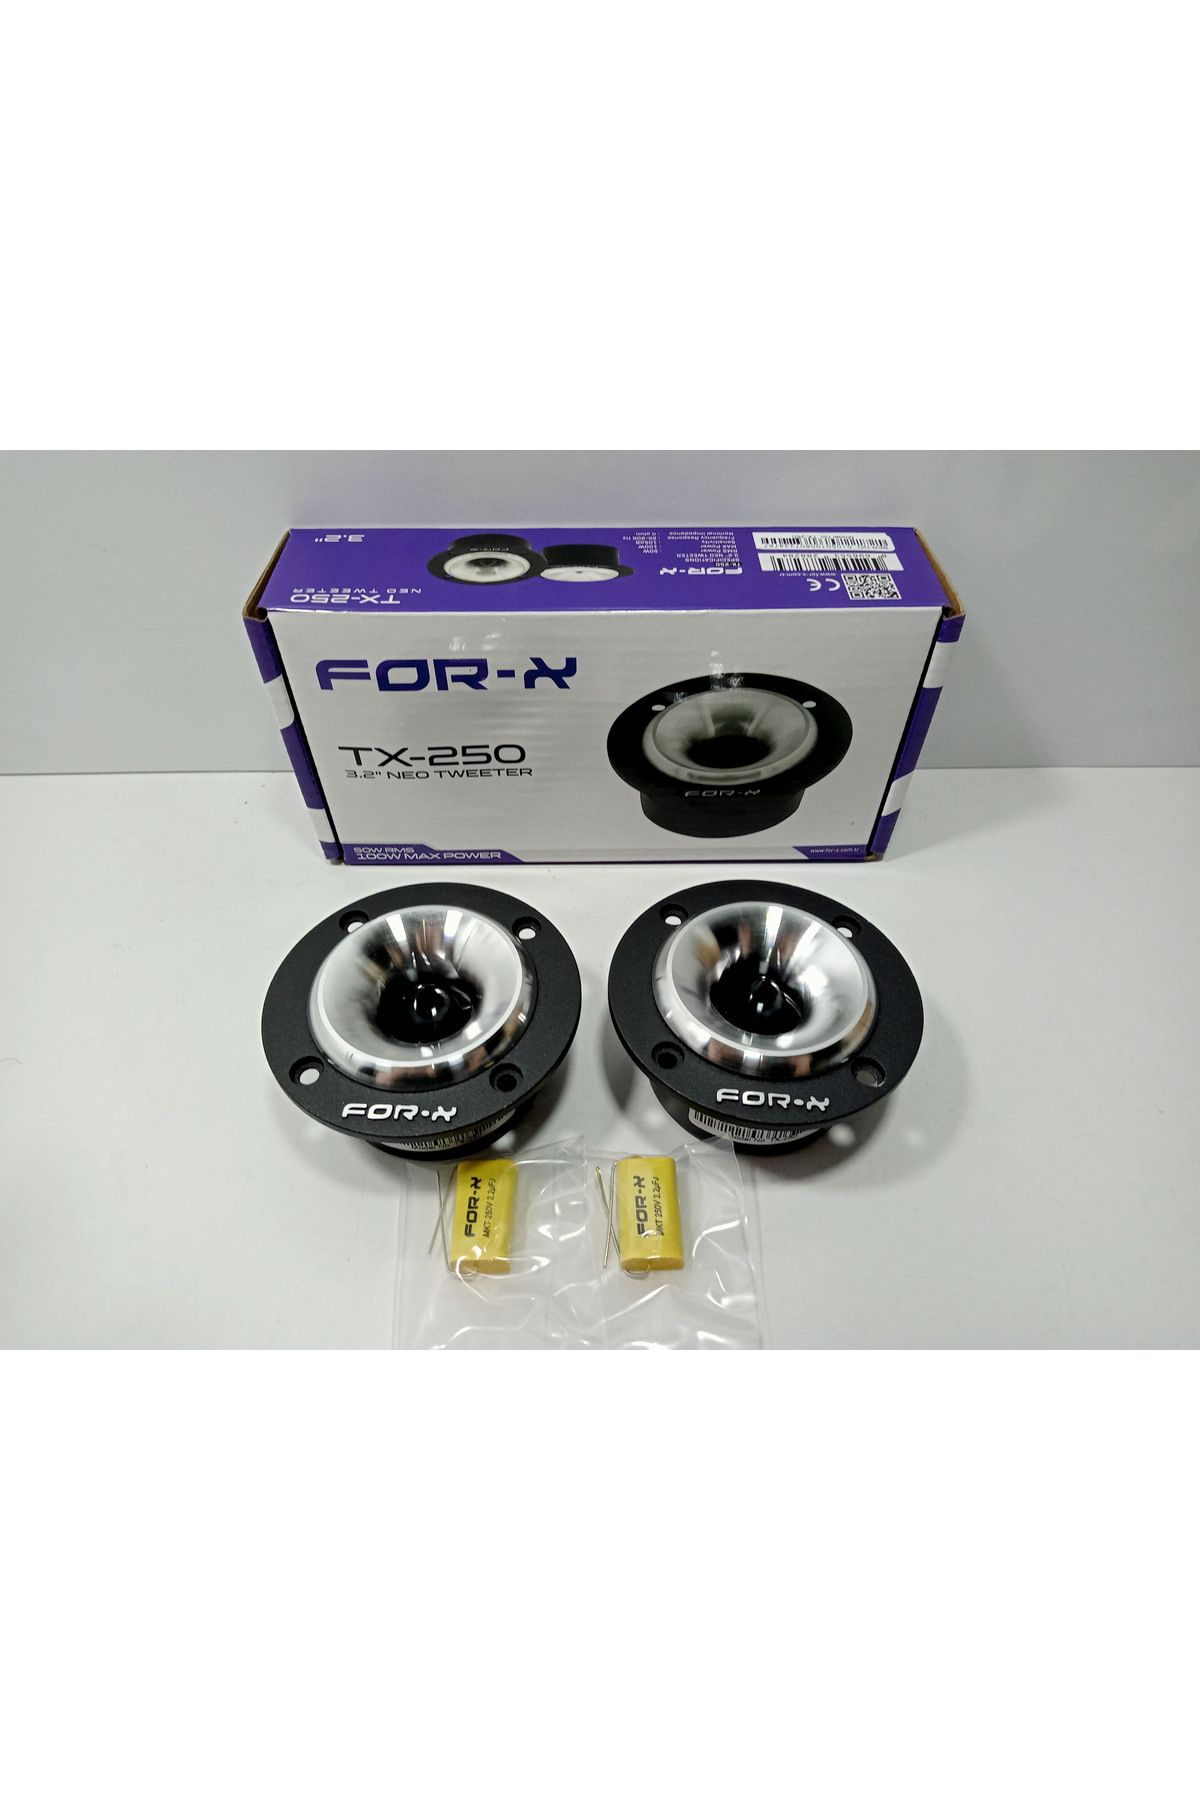 For-X Dome Tweeter 8cm – 100w 50RMS For-x TX-250 8cm Dome Tiz